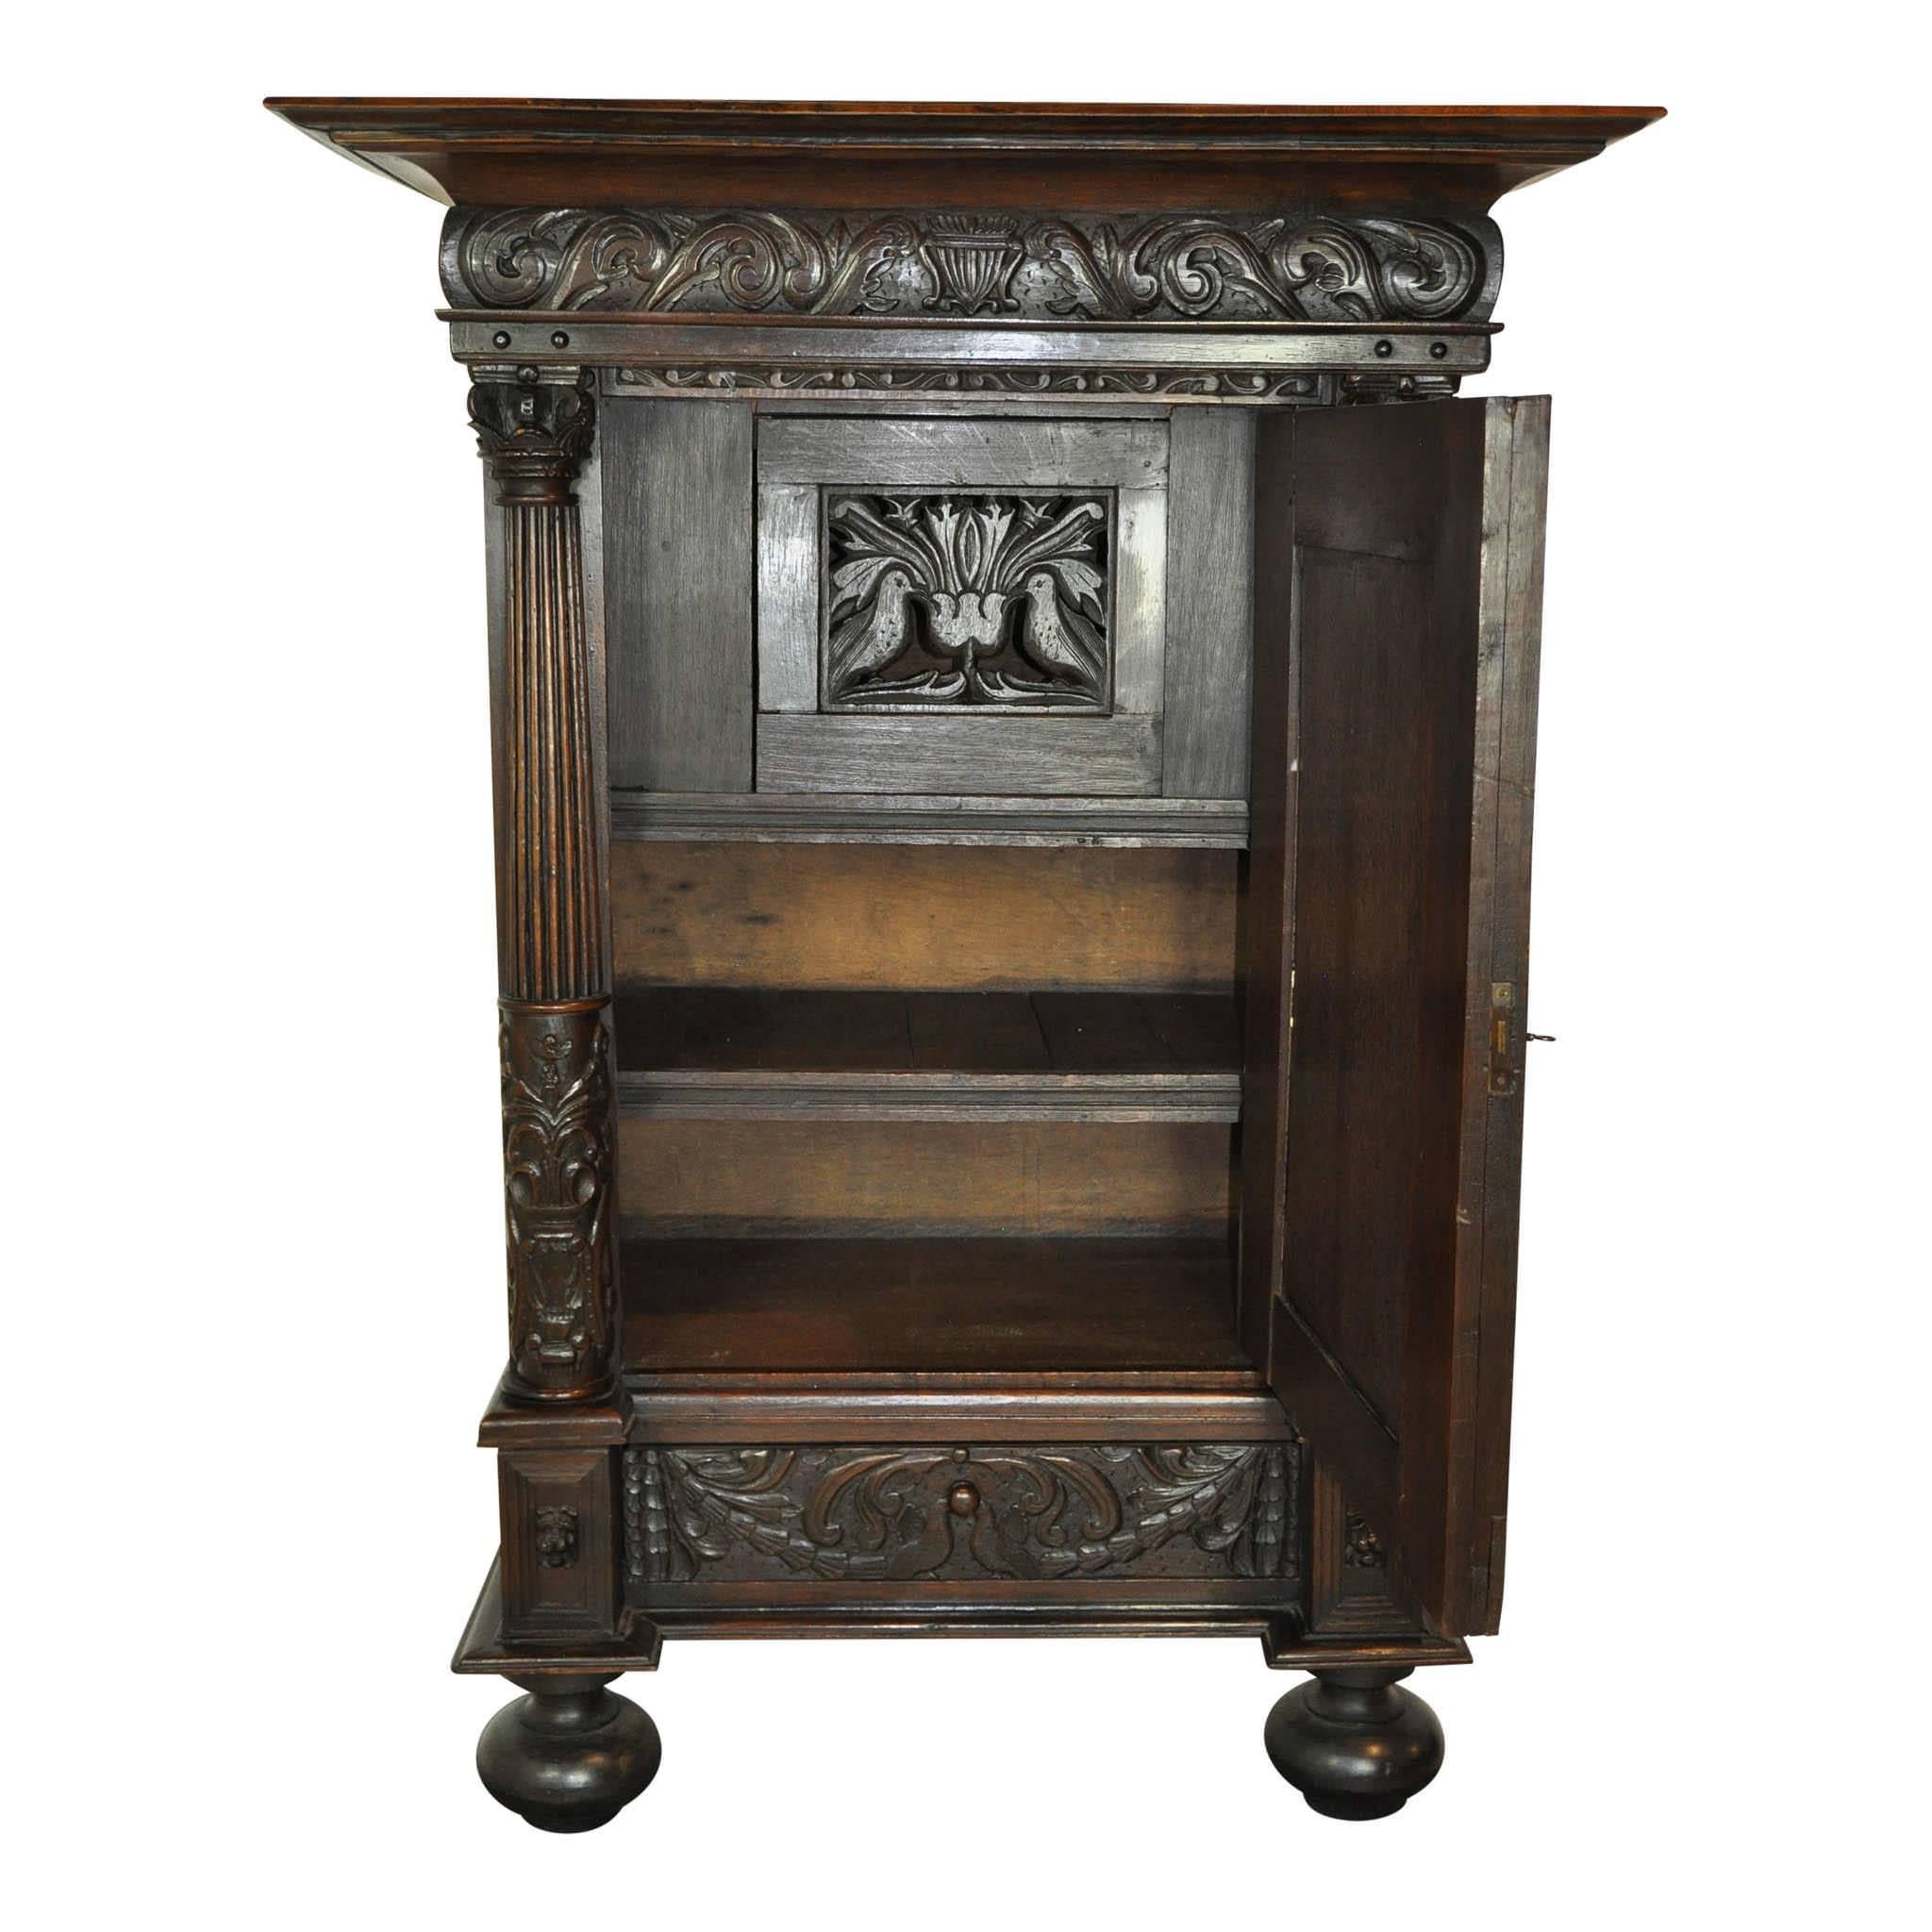 Adorned with putti heads and doves, this wedding cabinet exemplifies quality. From the ornate detail on the front and sides to the quarter sawn white oak used on all parts of the cabinet (even the back), everything about the piece shows the extreme